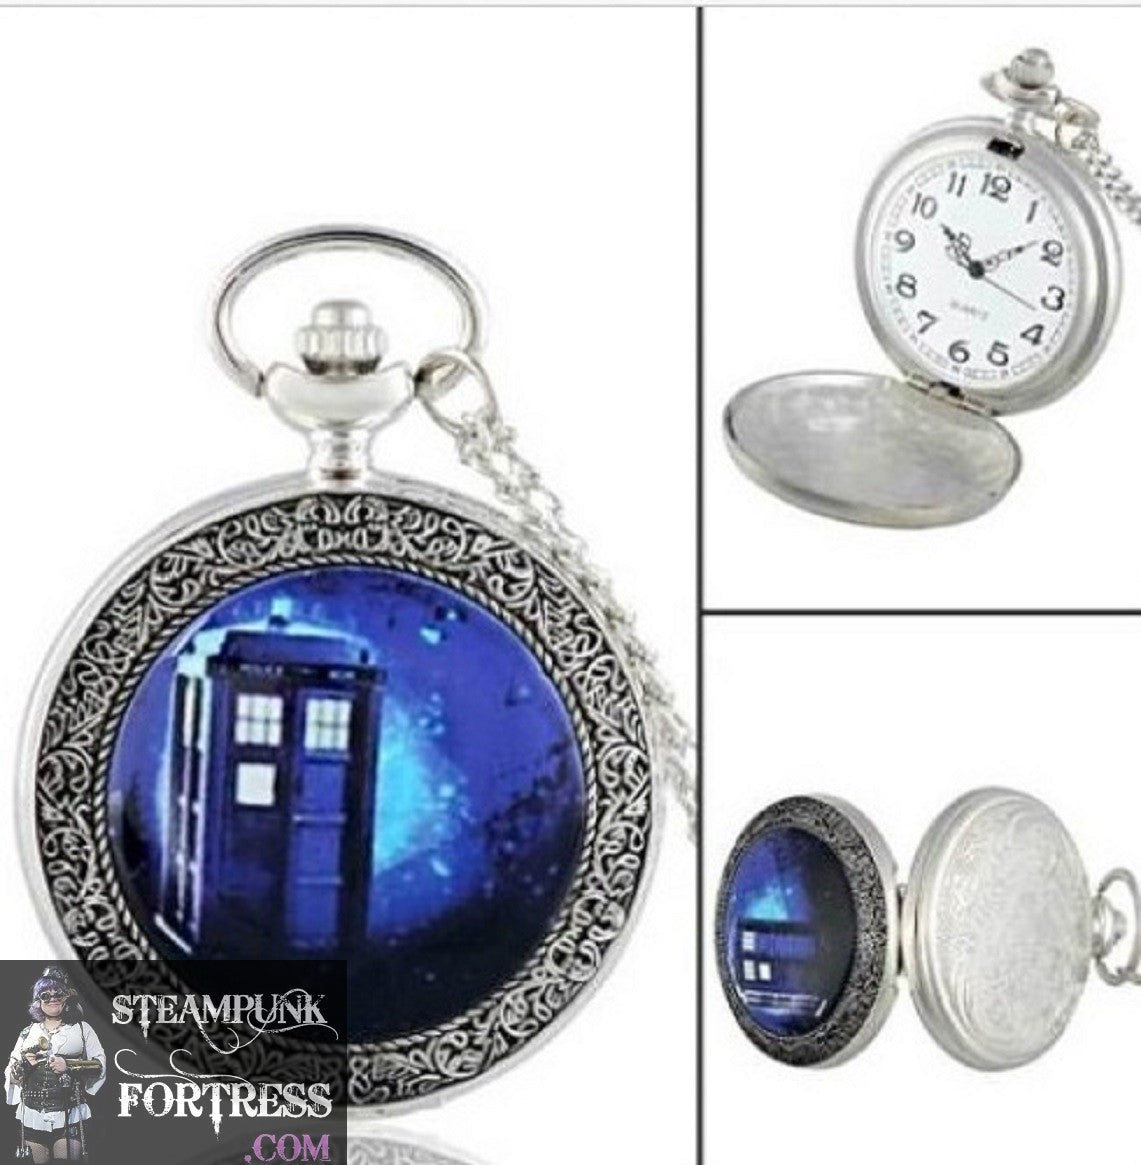 SILVER DOCTOR DR WHO TARDIS WATCH LARGE WORKING POCKETWATCH POCKET WATCH WITH CHAIN AND CLASP - MASS PRODUCED